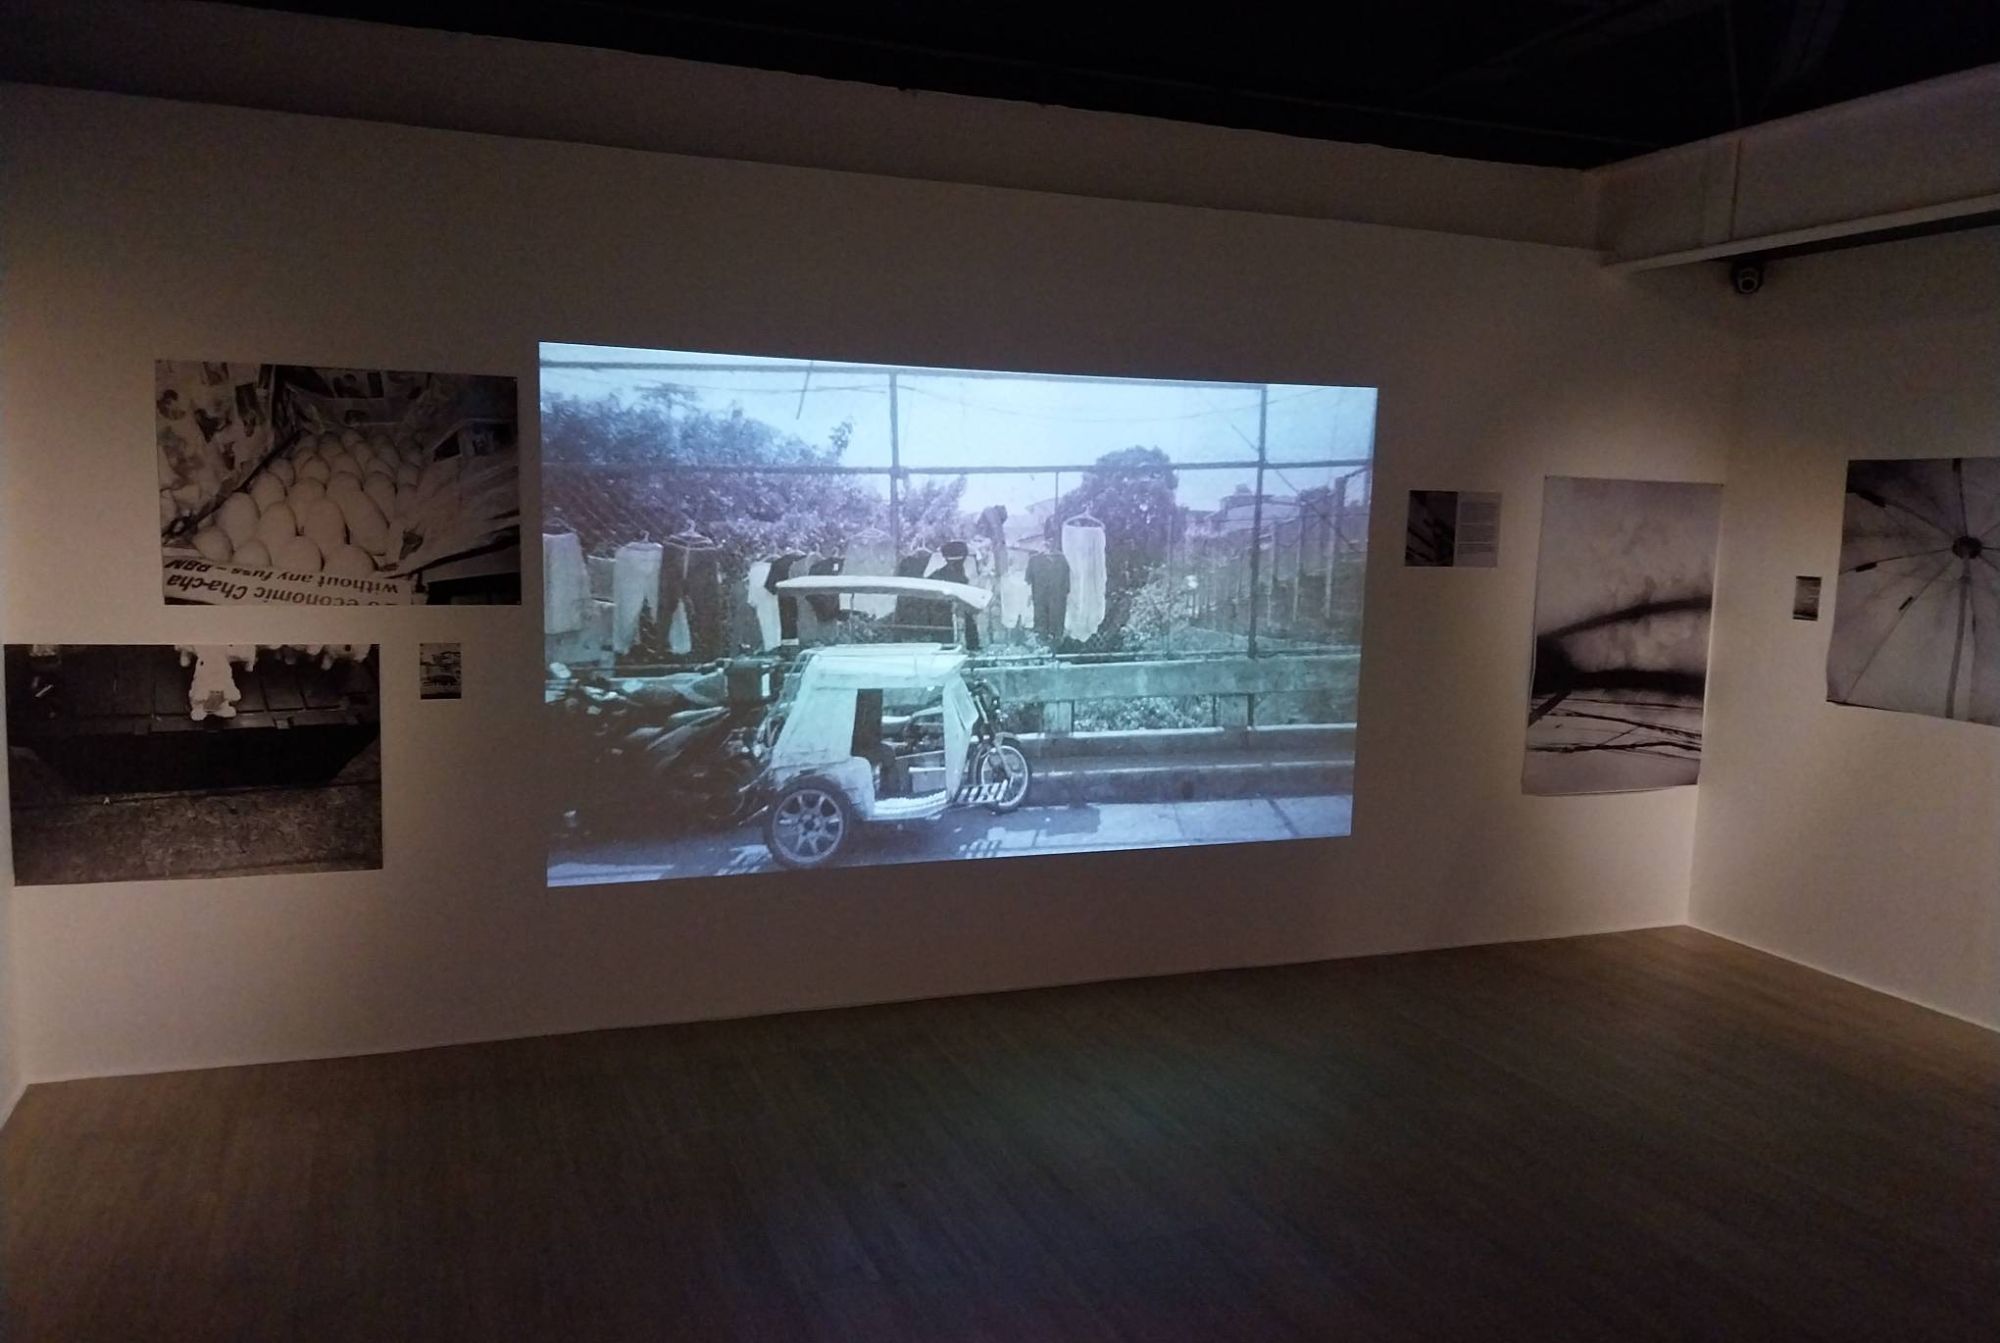 The projected image from Khavn's "Hungkag" exhibit. Photo by Elle Yap.